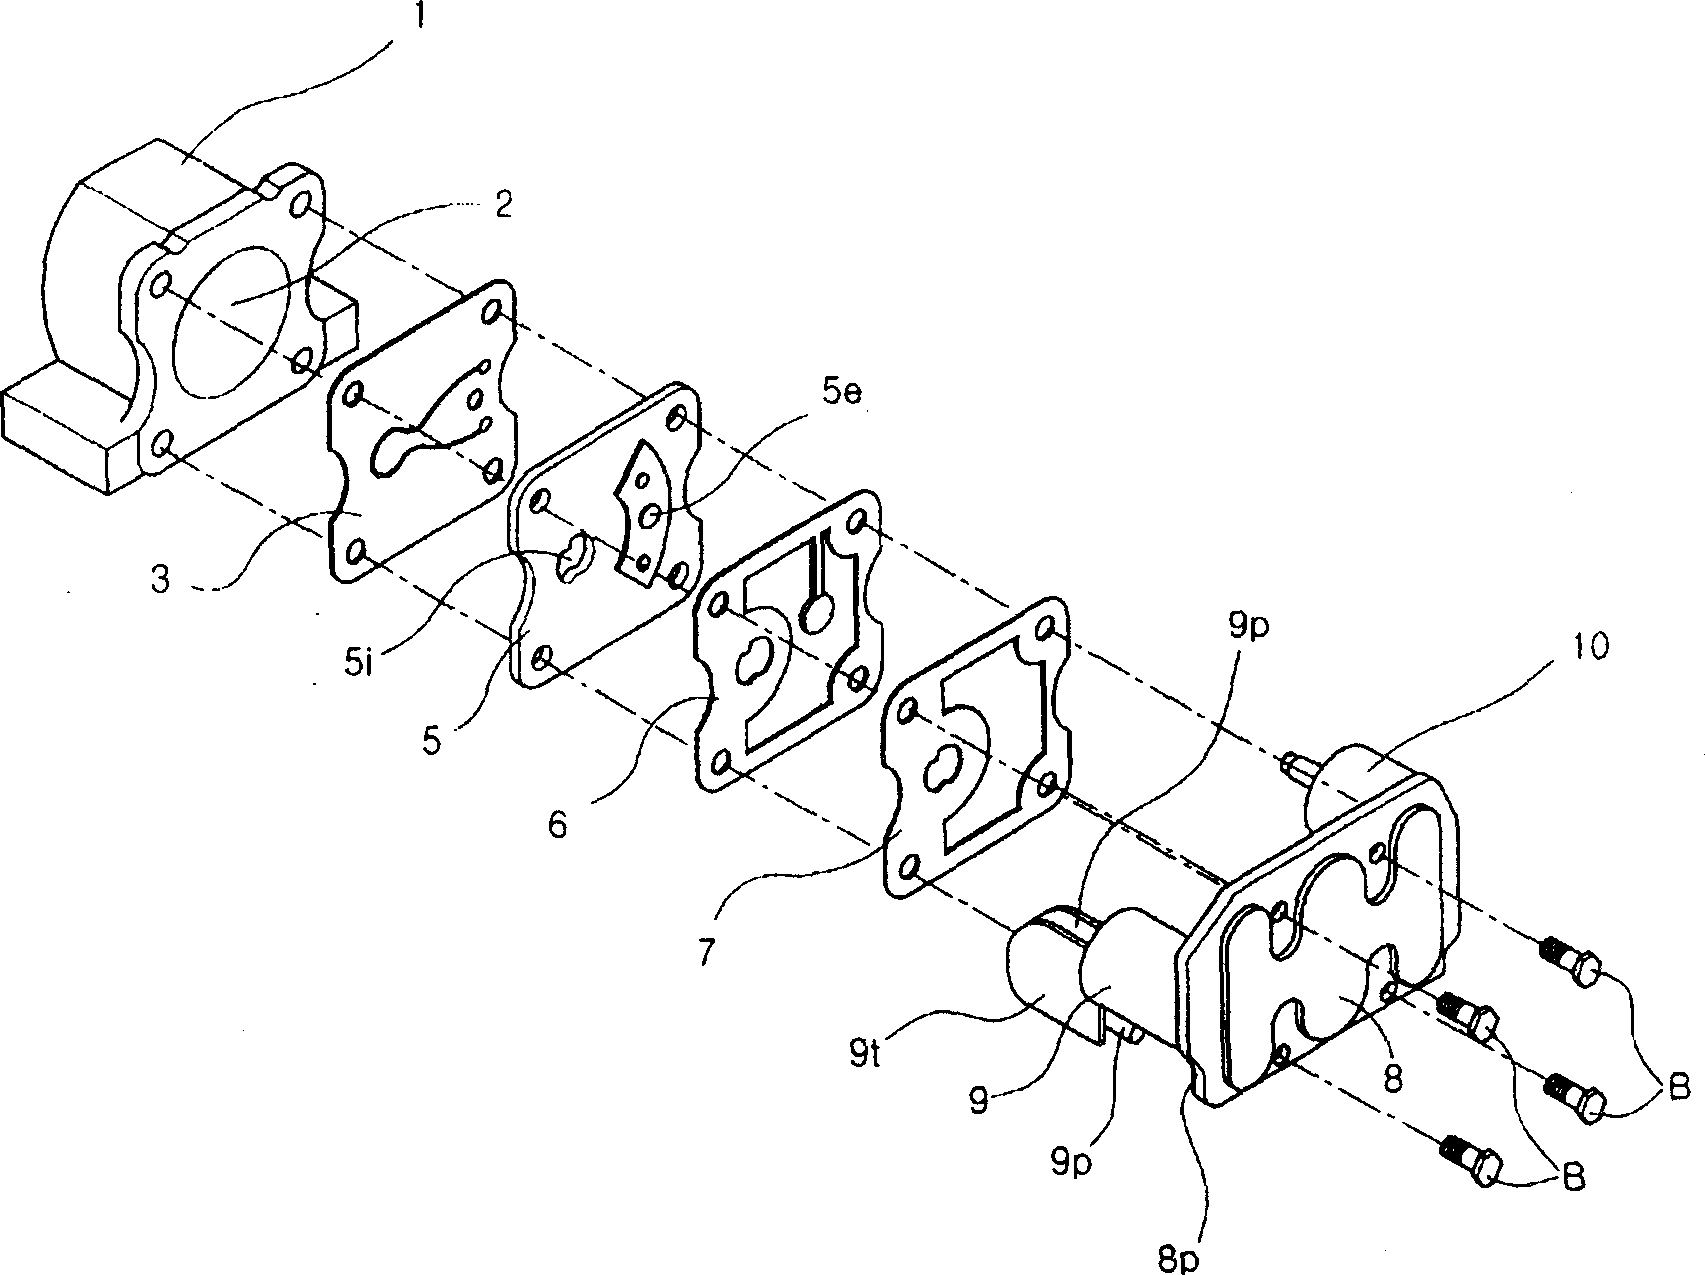 Integrated top cover assembly of hermetic compressor